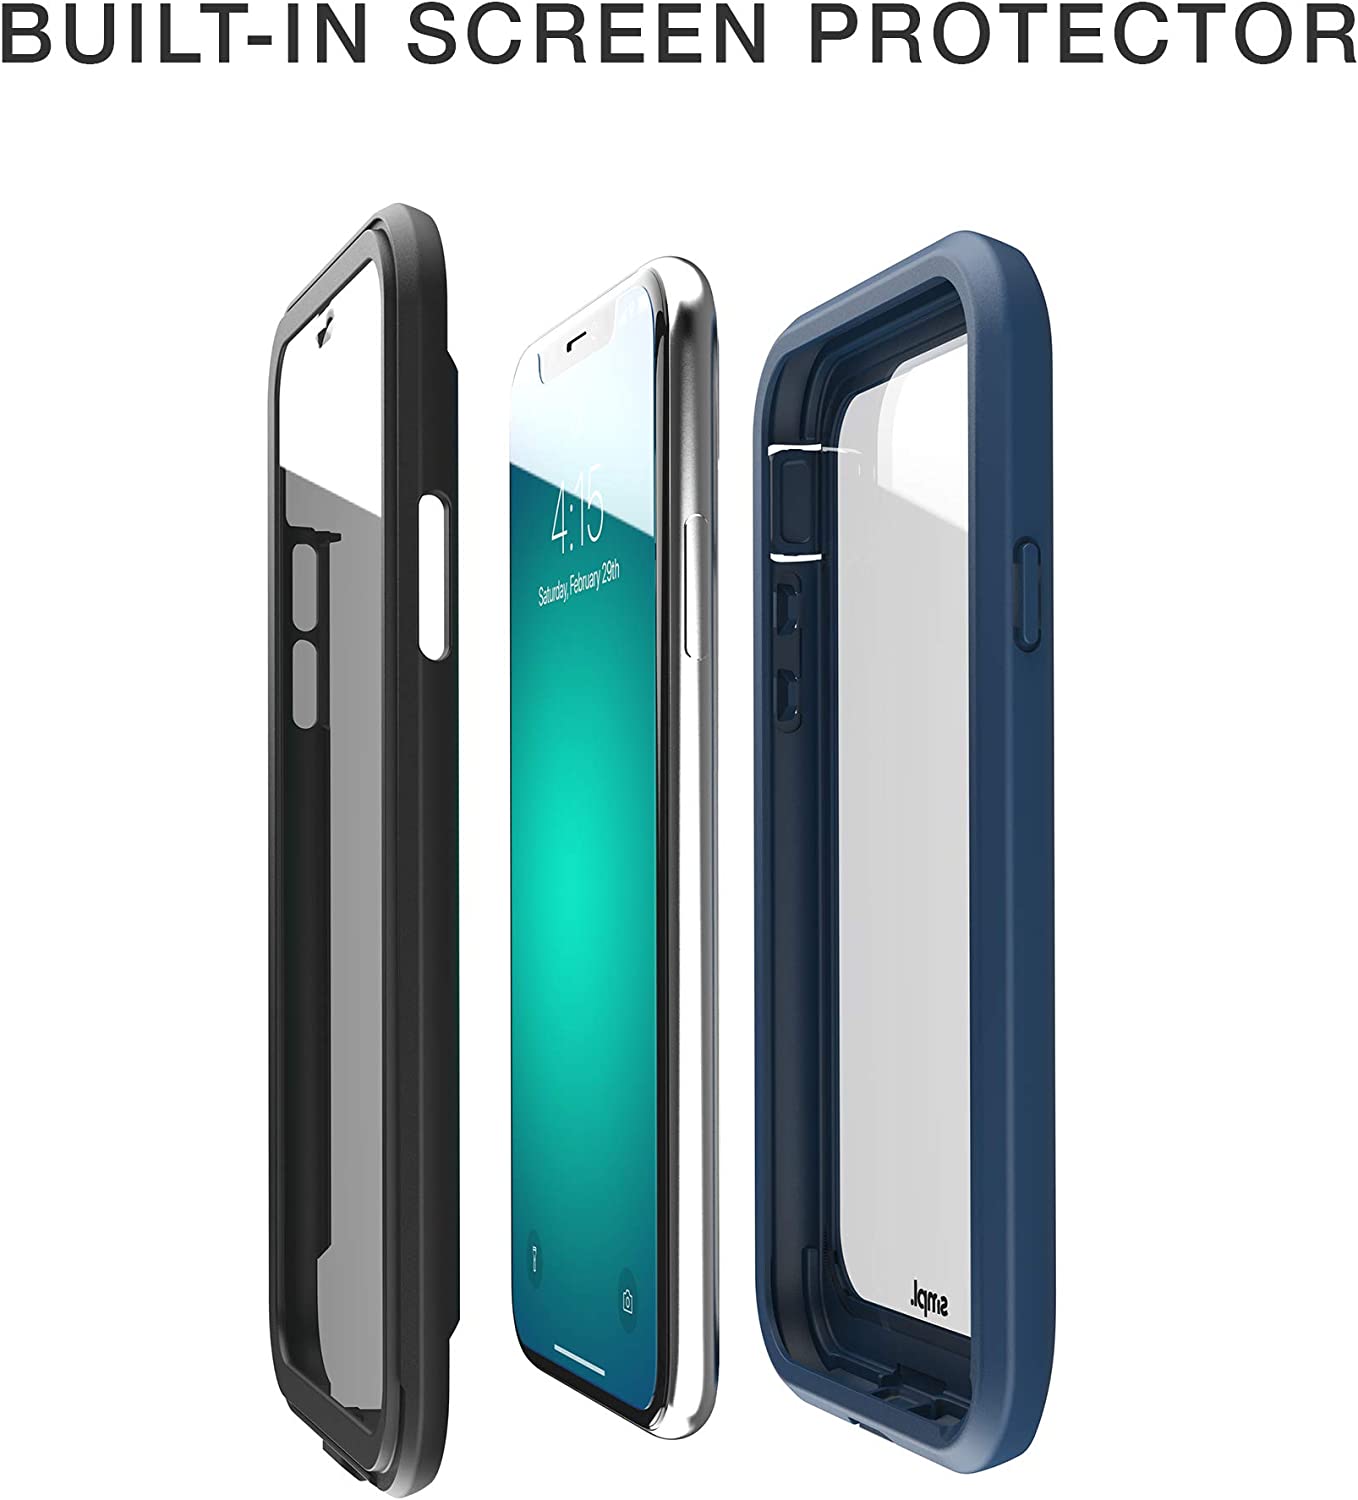 Hitcase Shield LINK for iPhone X/Xs